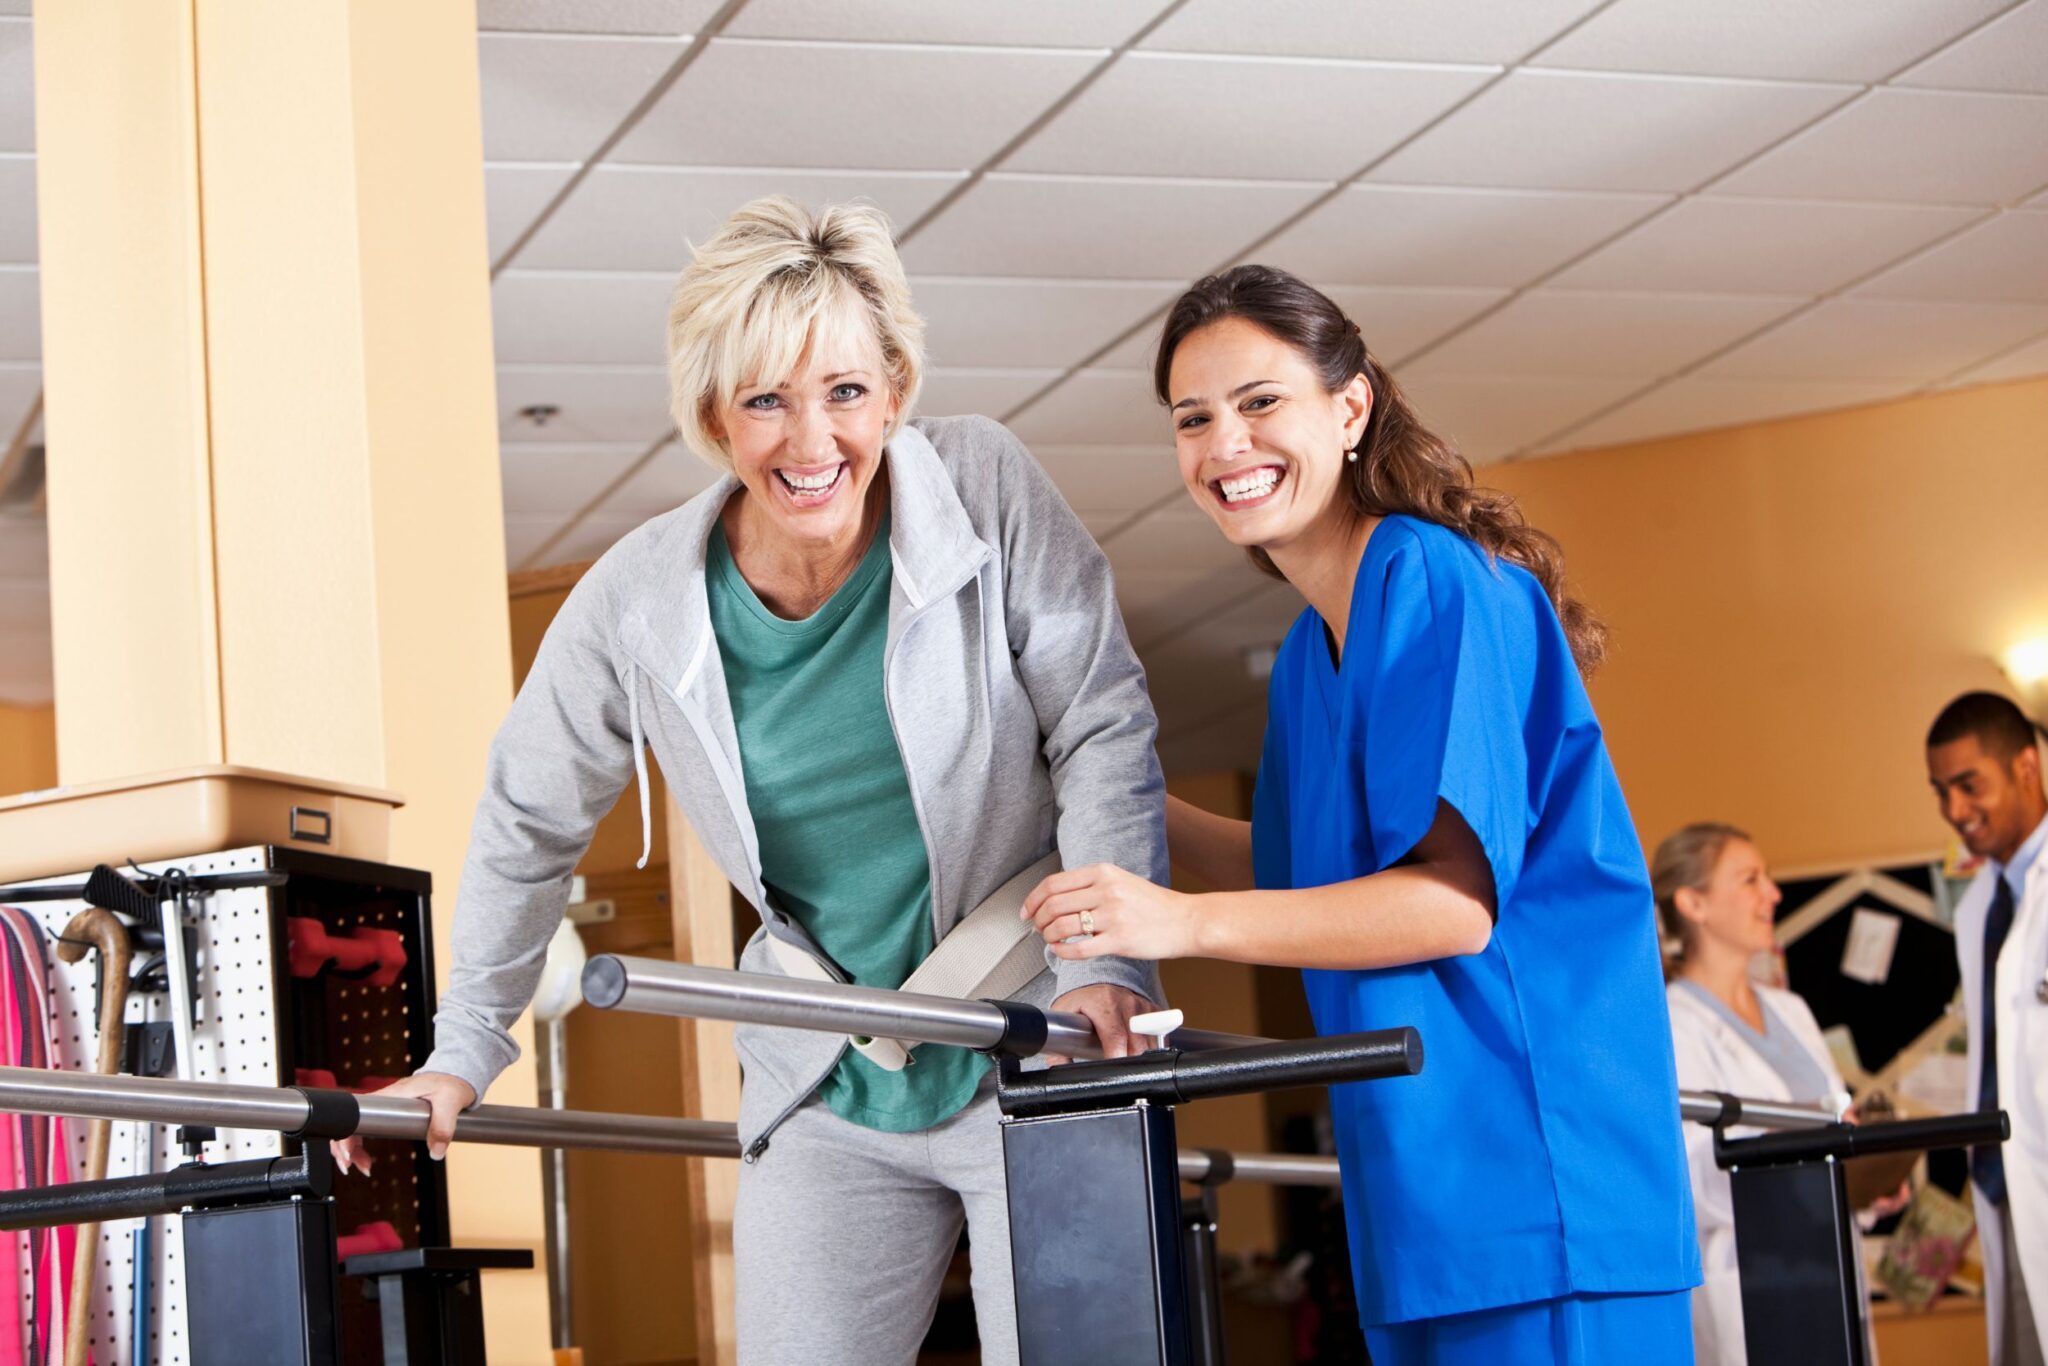 A physical therapist and her patient smiling at the camera as the therapist helps her patient walk